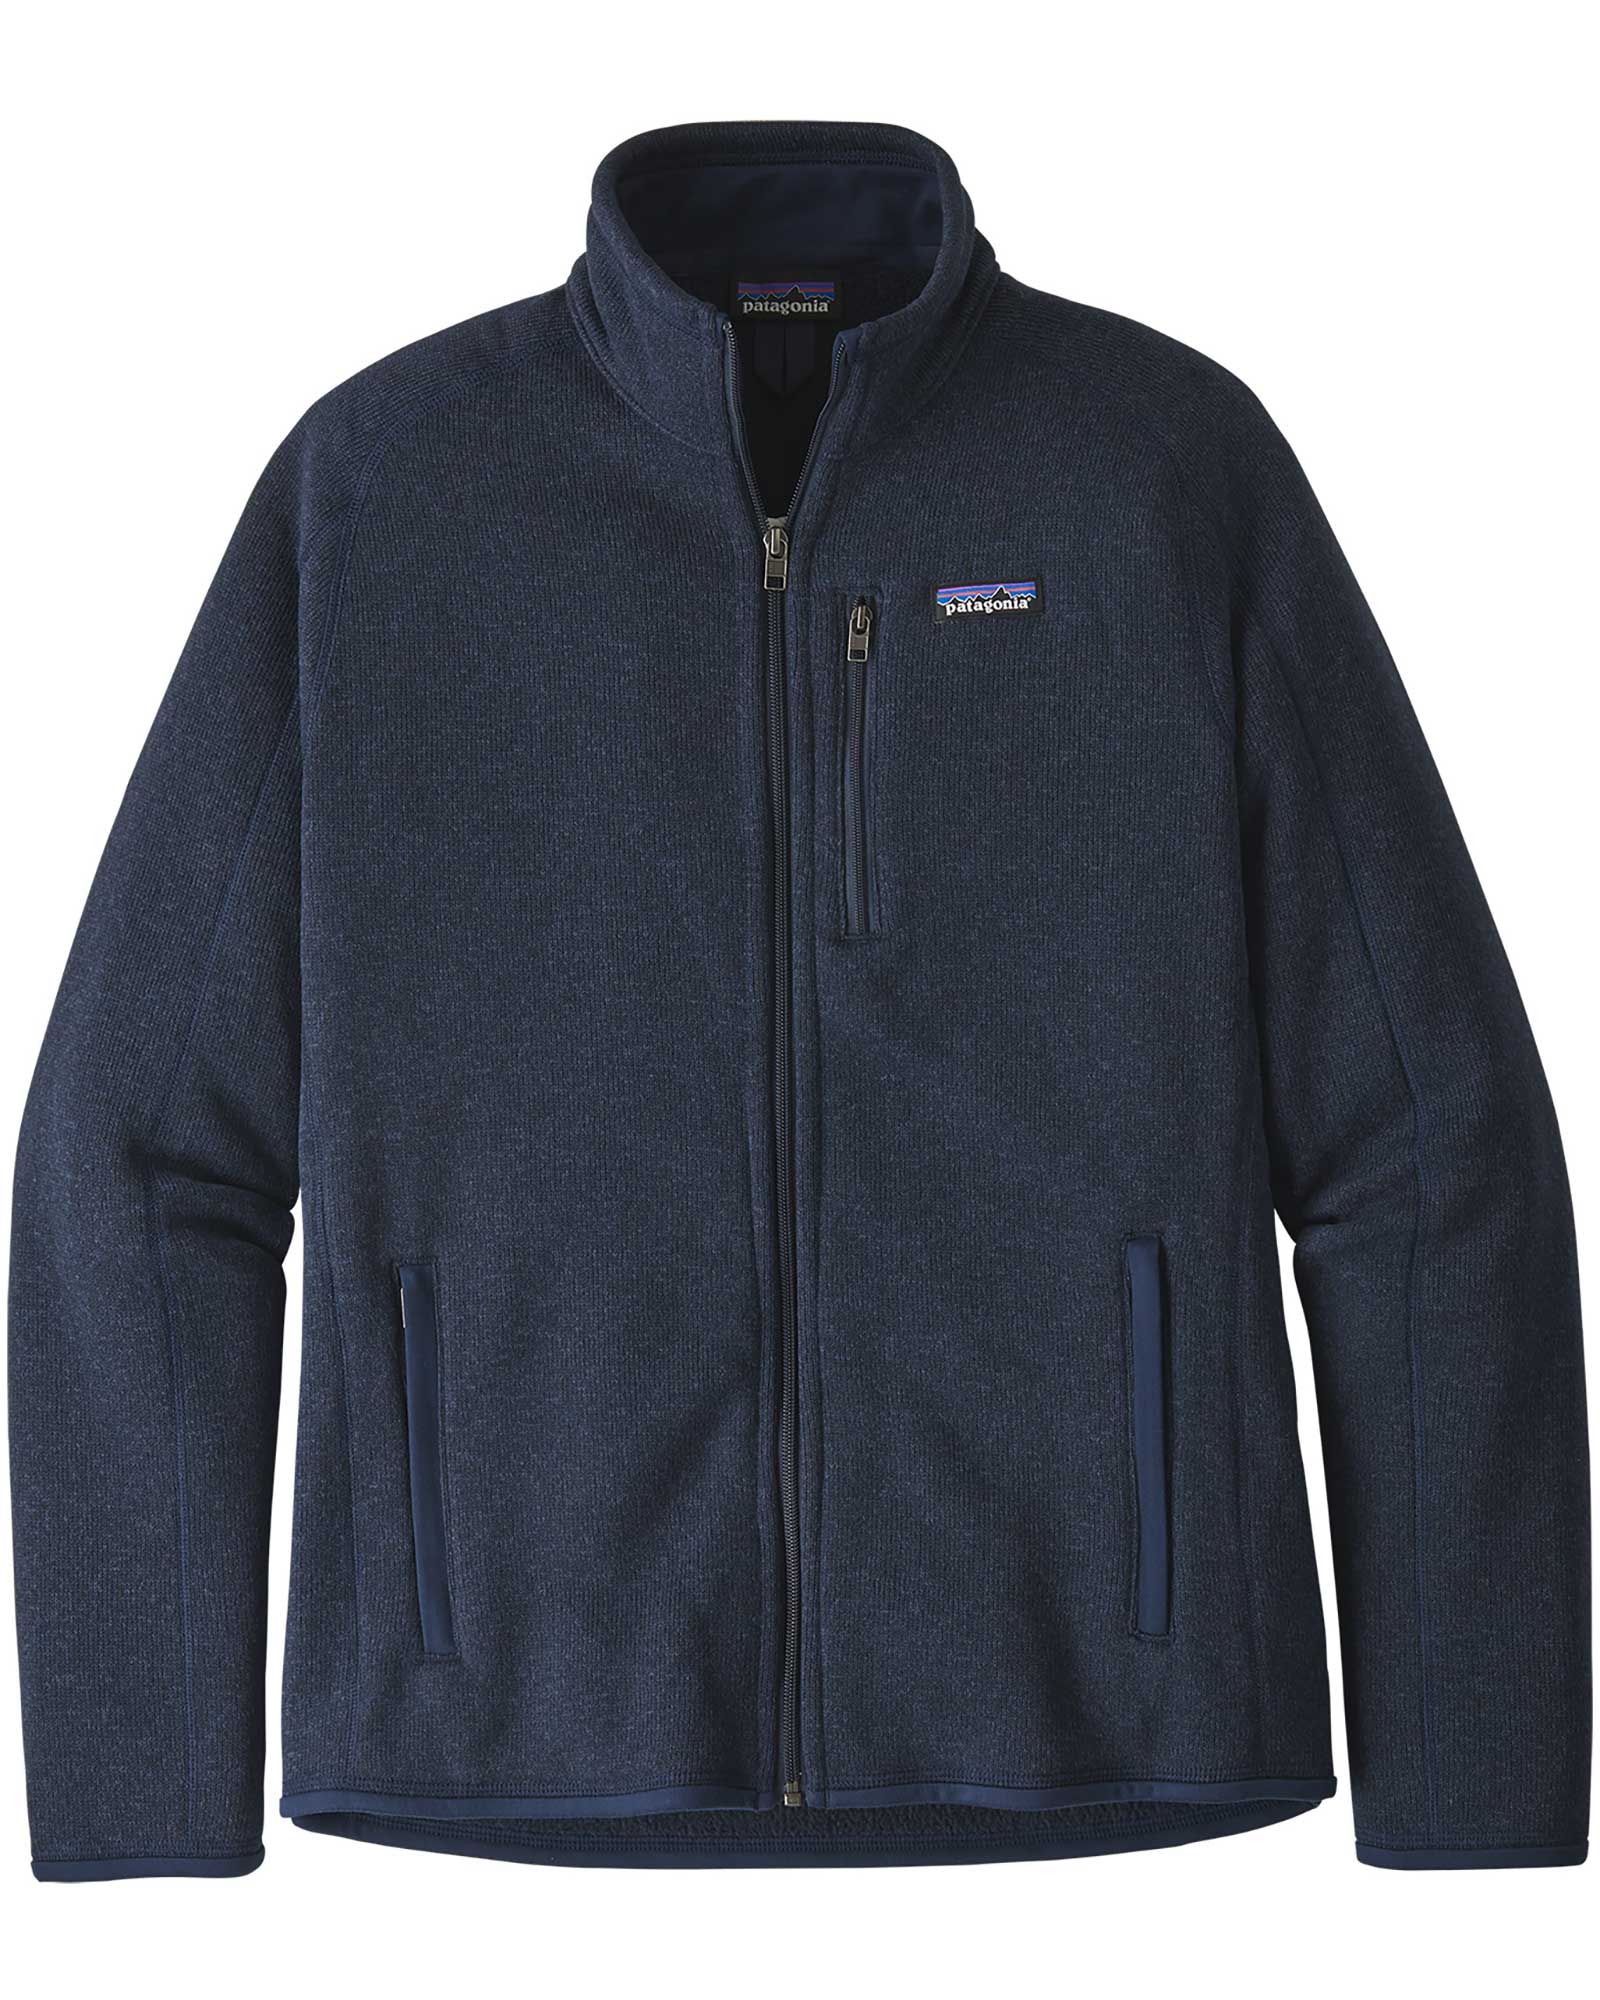 Patagonia Better Sweater Men’s Jacket - New Navy XL